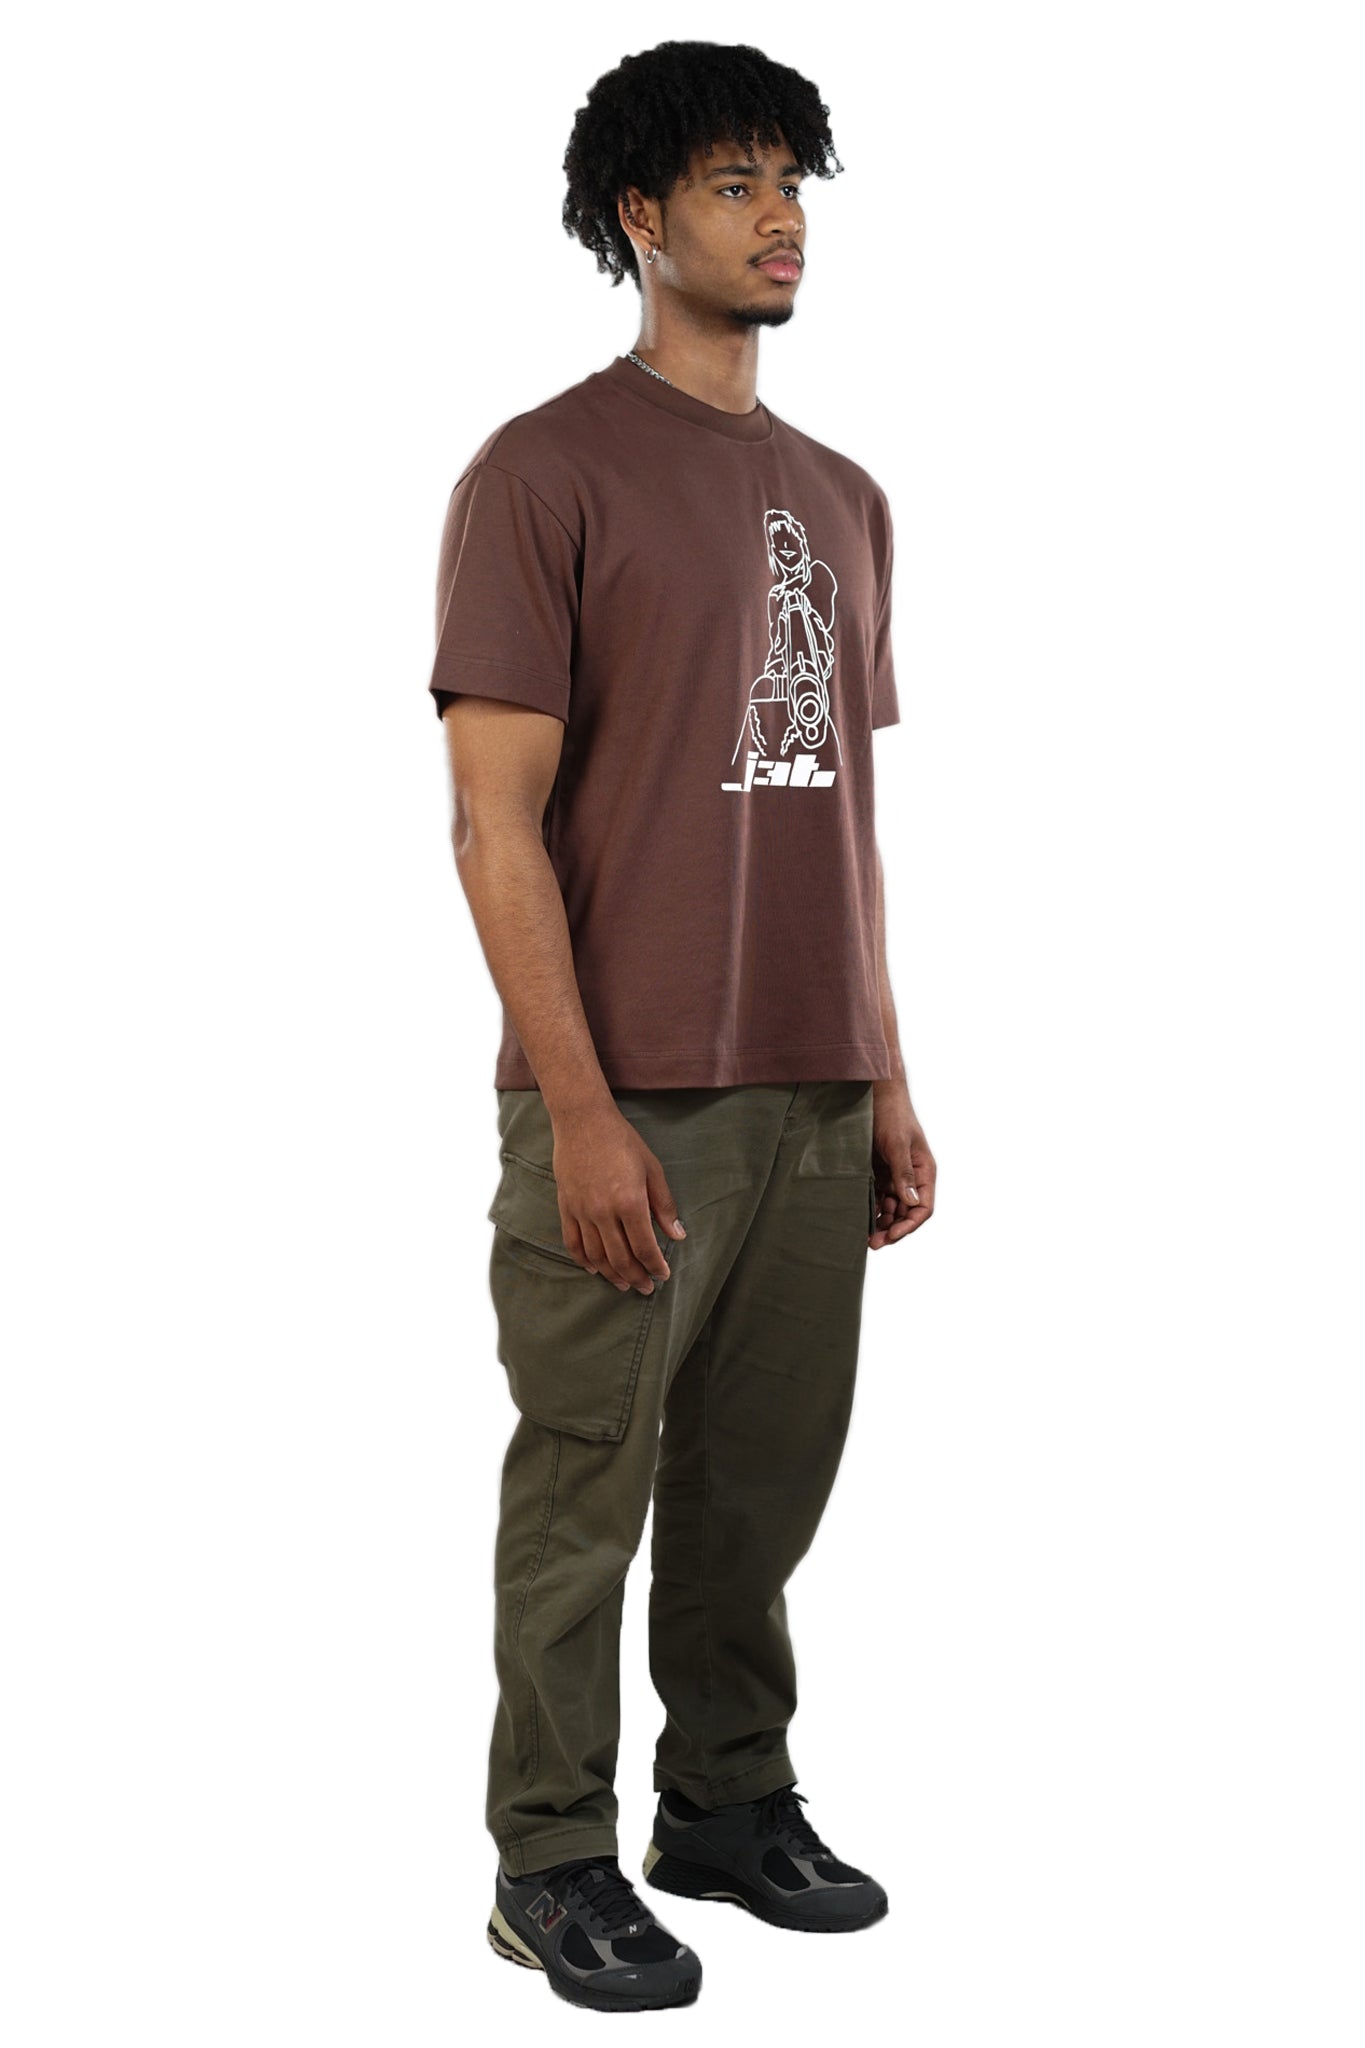 6'2" male wearing Remy Tee brown in a size large- 45 degree angle